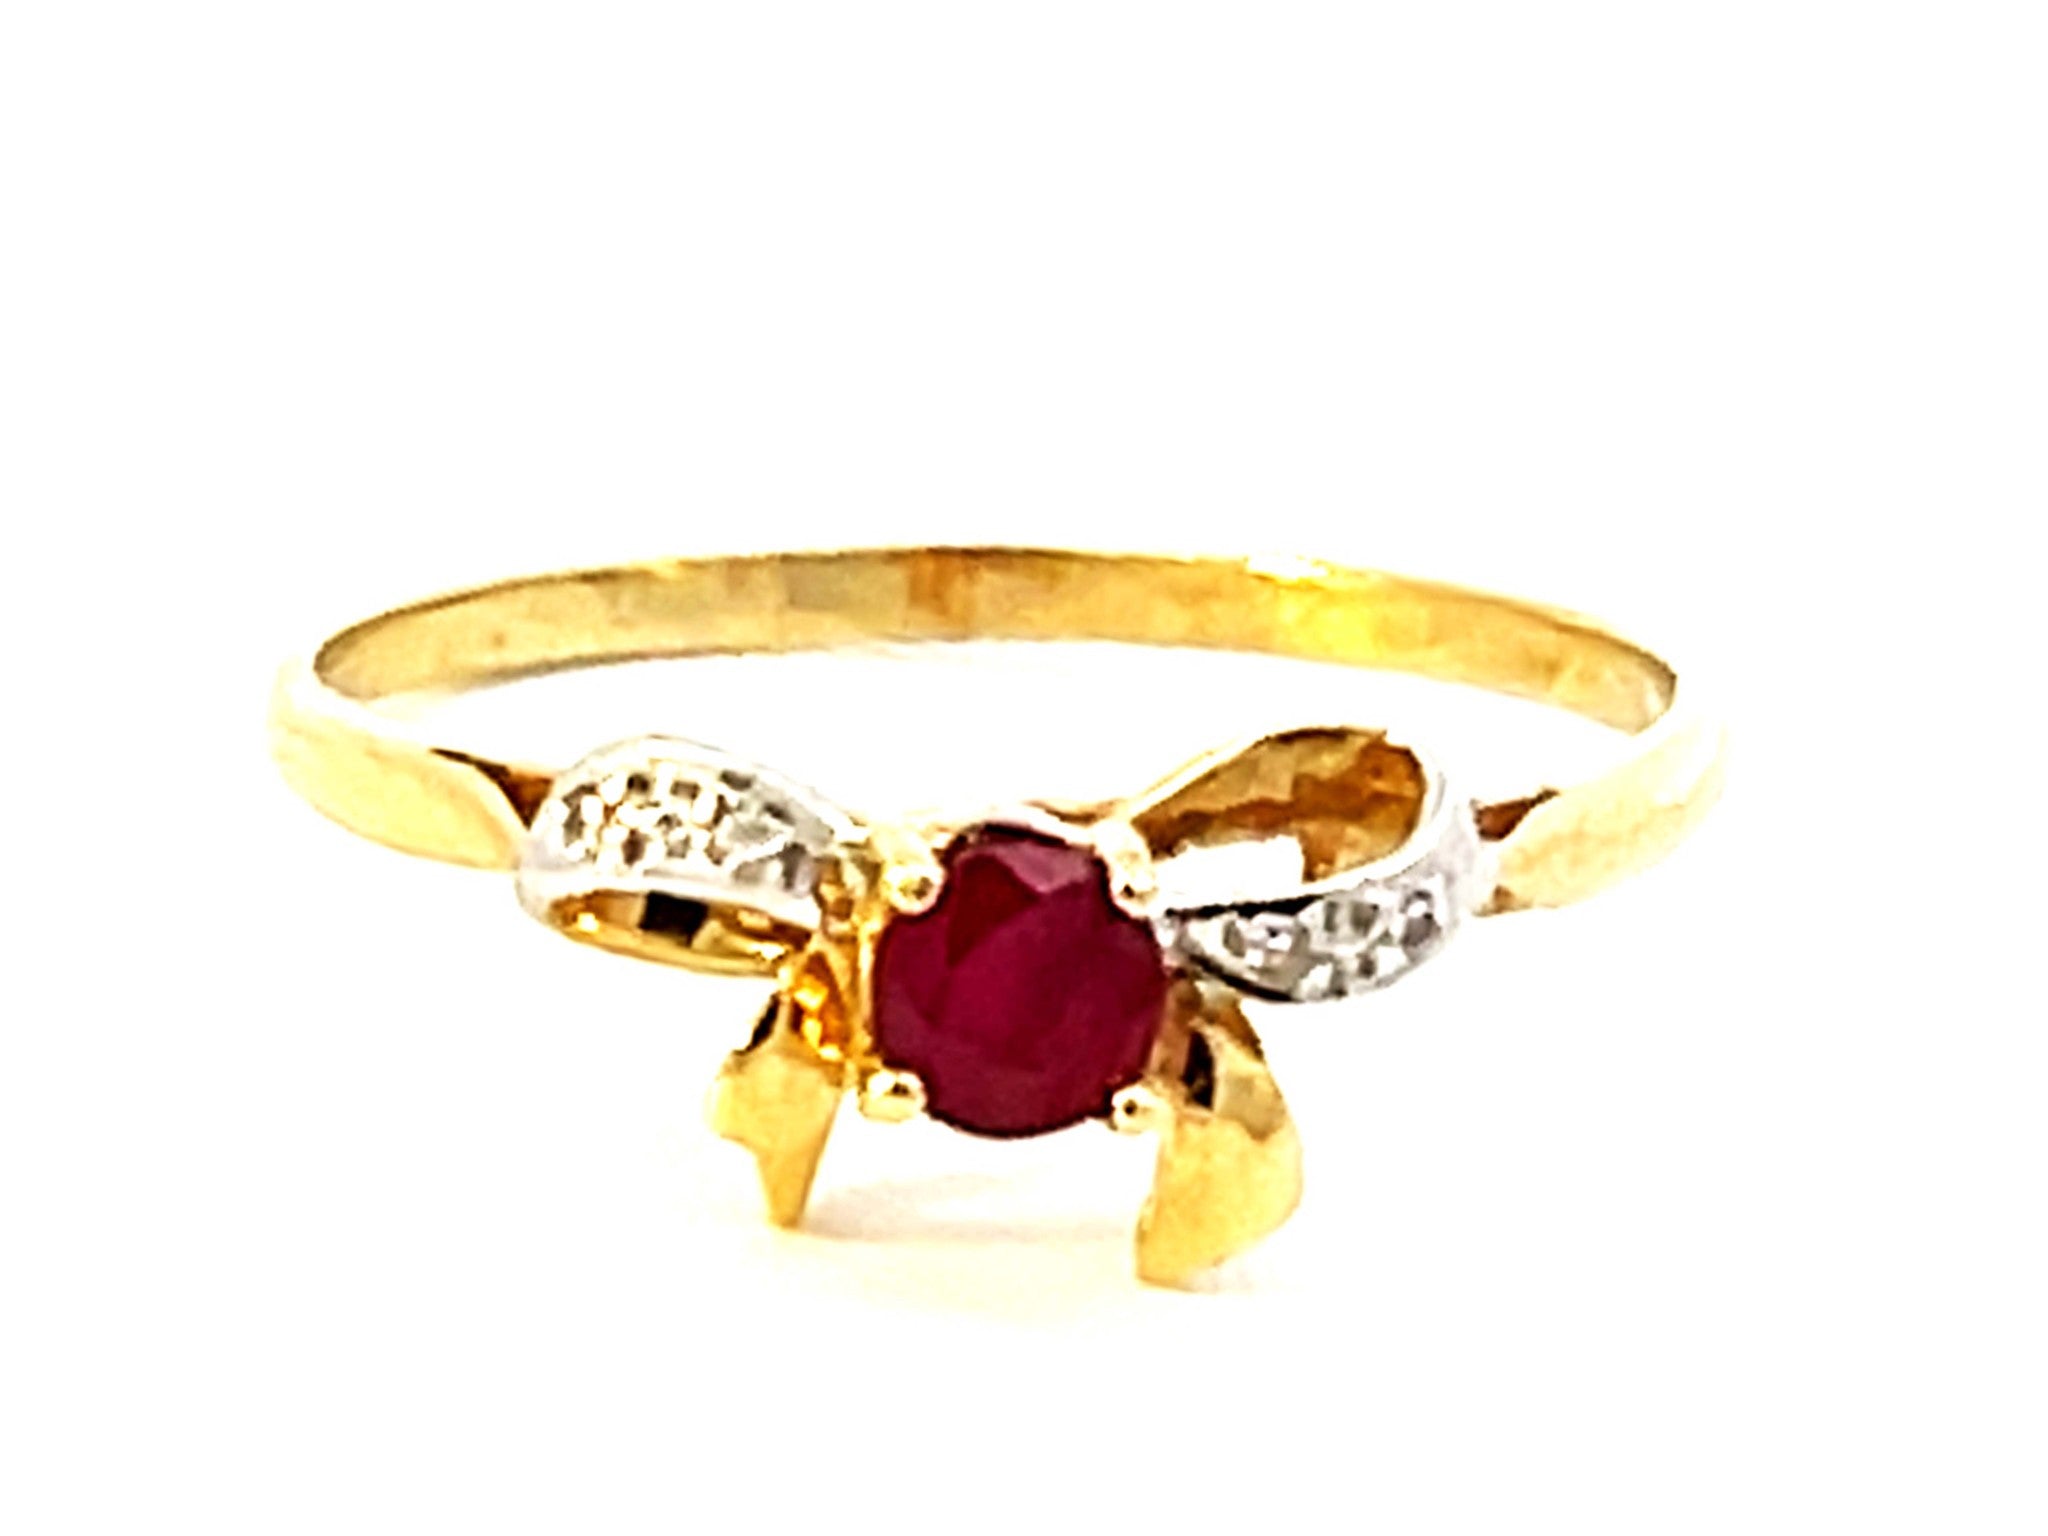 Round Red Ruby Bowtie Diamond Ring in 14k Yellow Gold